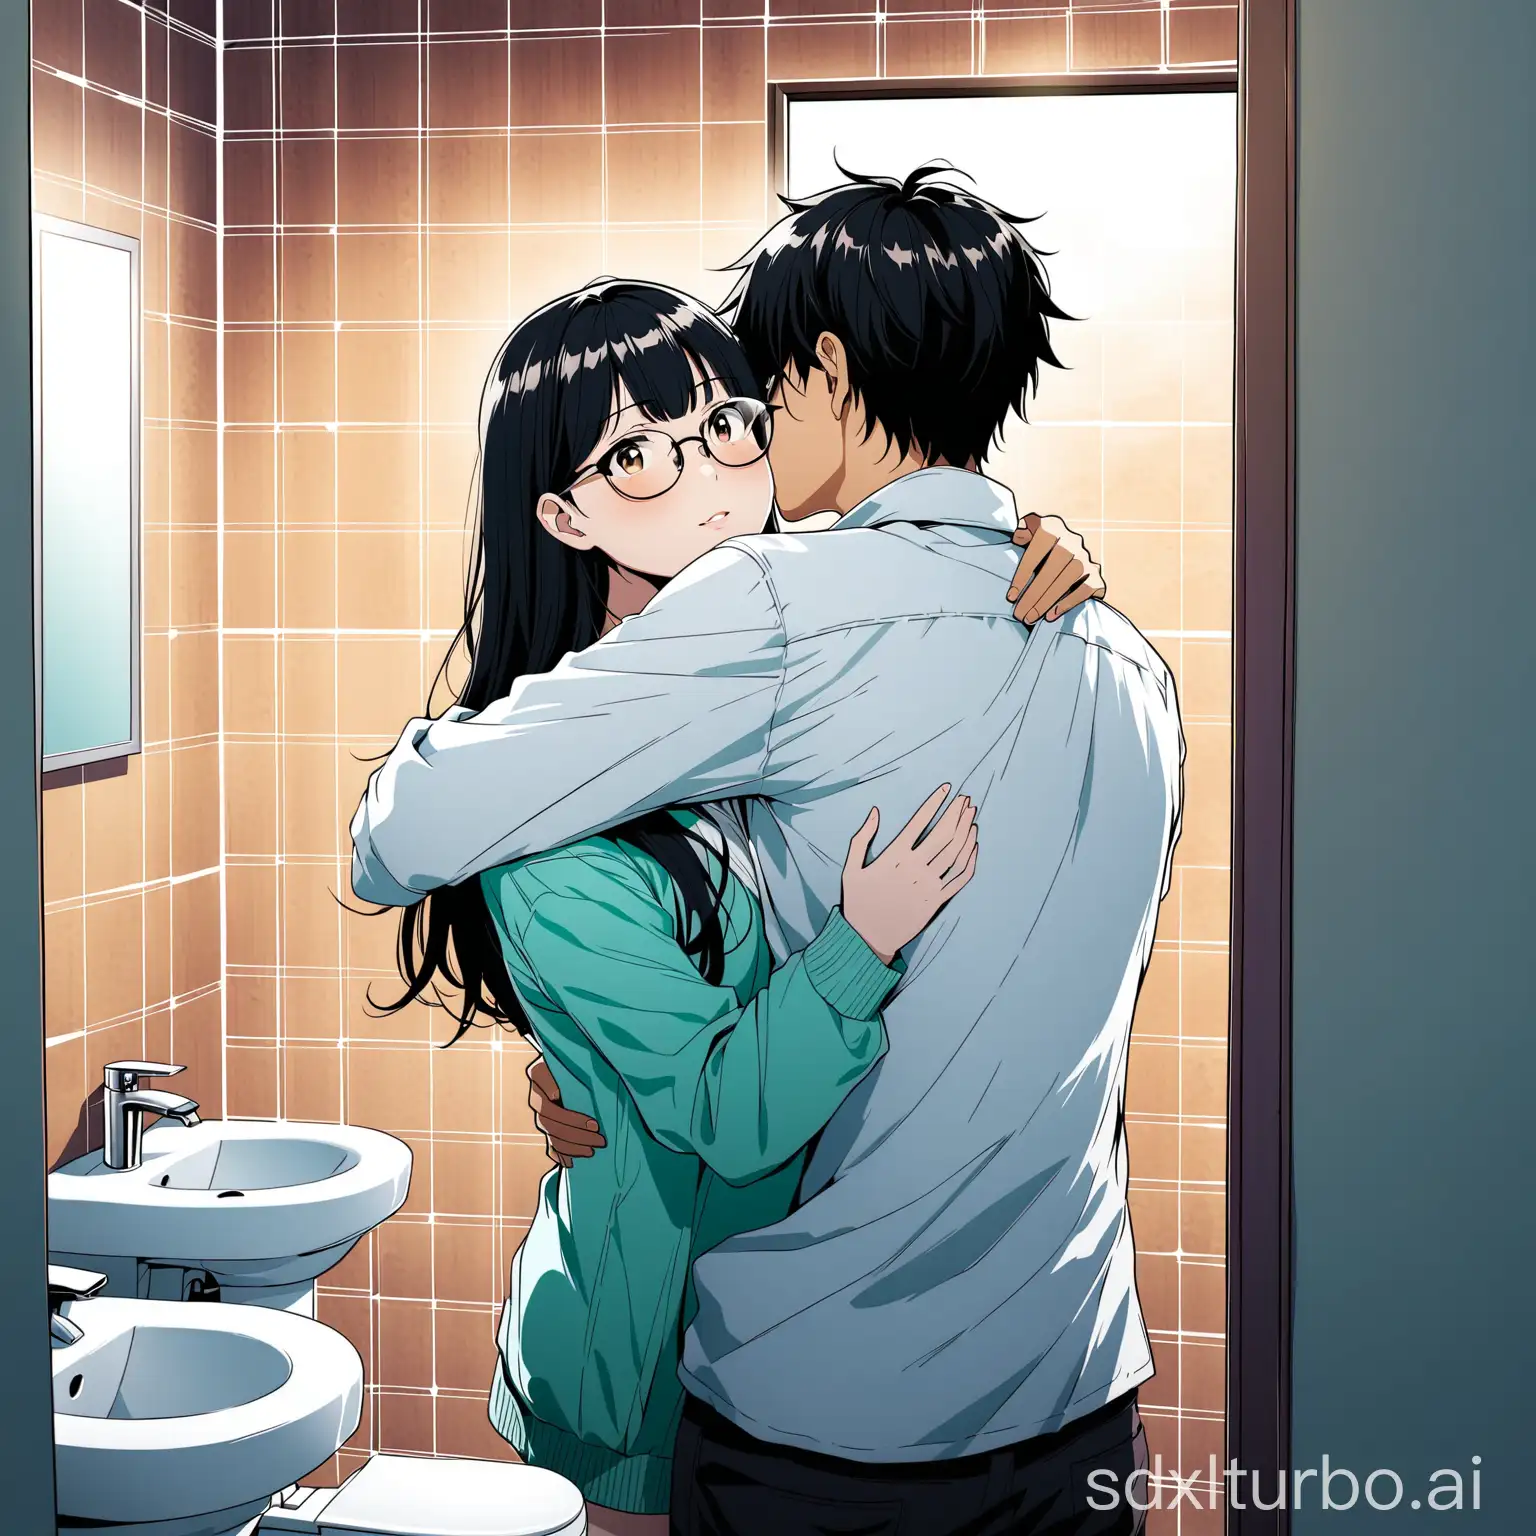 Affectionate-Embrace-Young-Man-Comforts-Asian-Girl-in-Bathroom